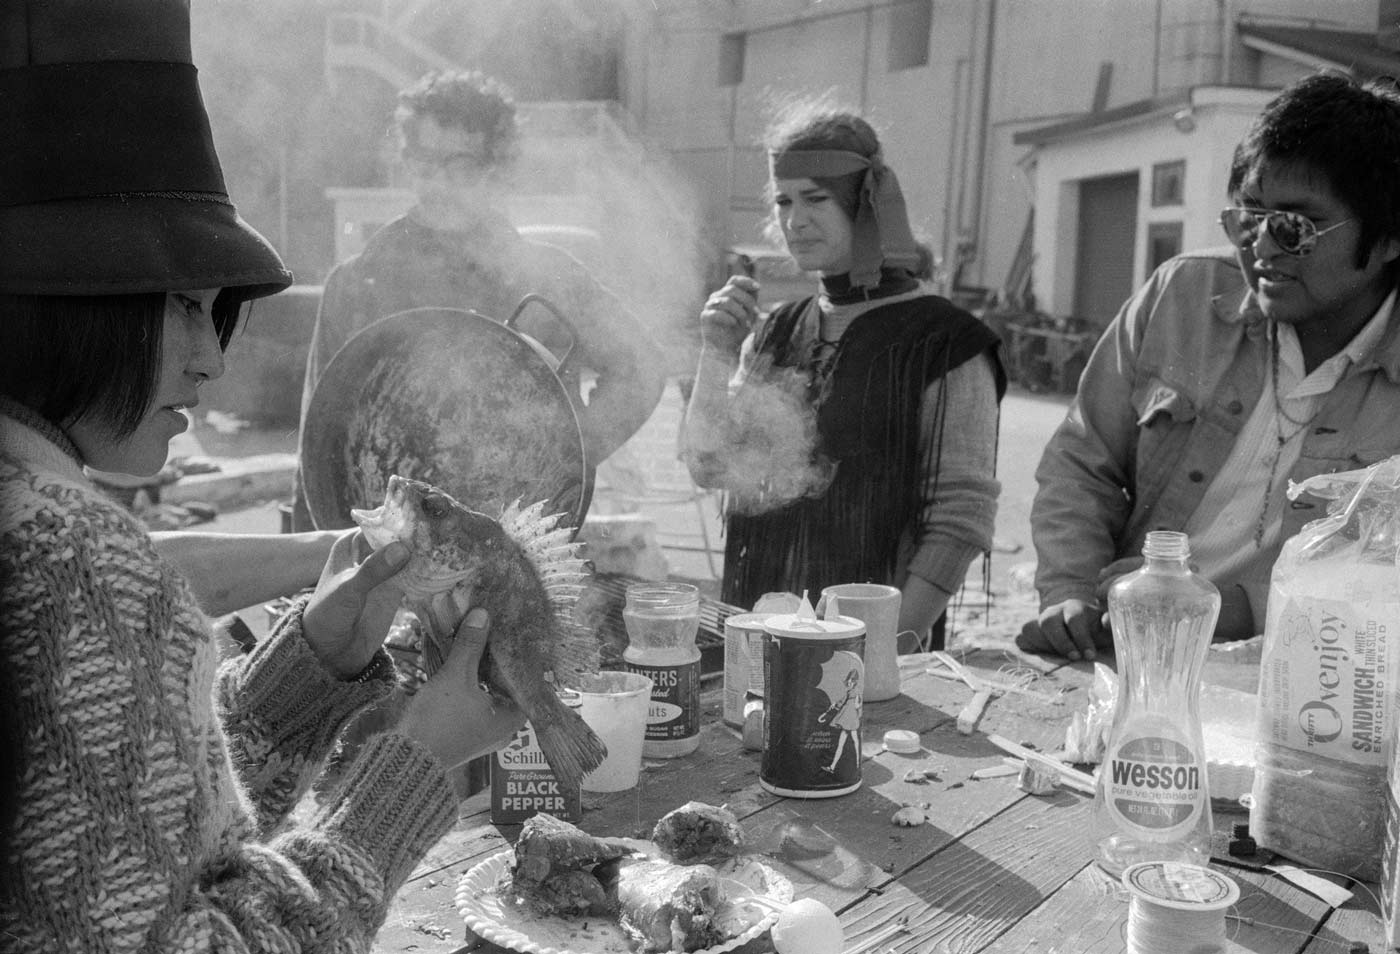 Black and white photograph of AIM members/supporters preparing fish and other food.